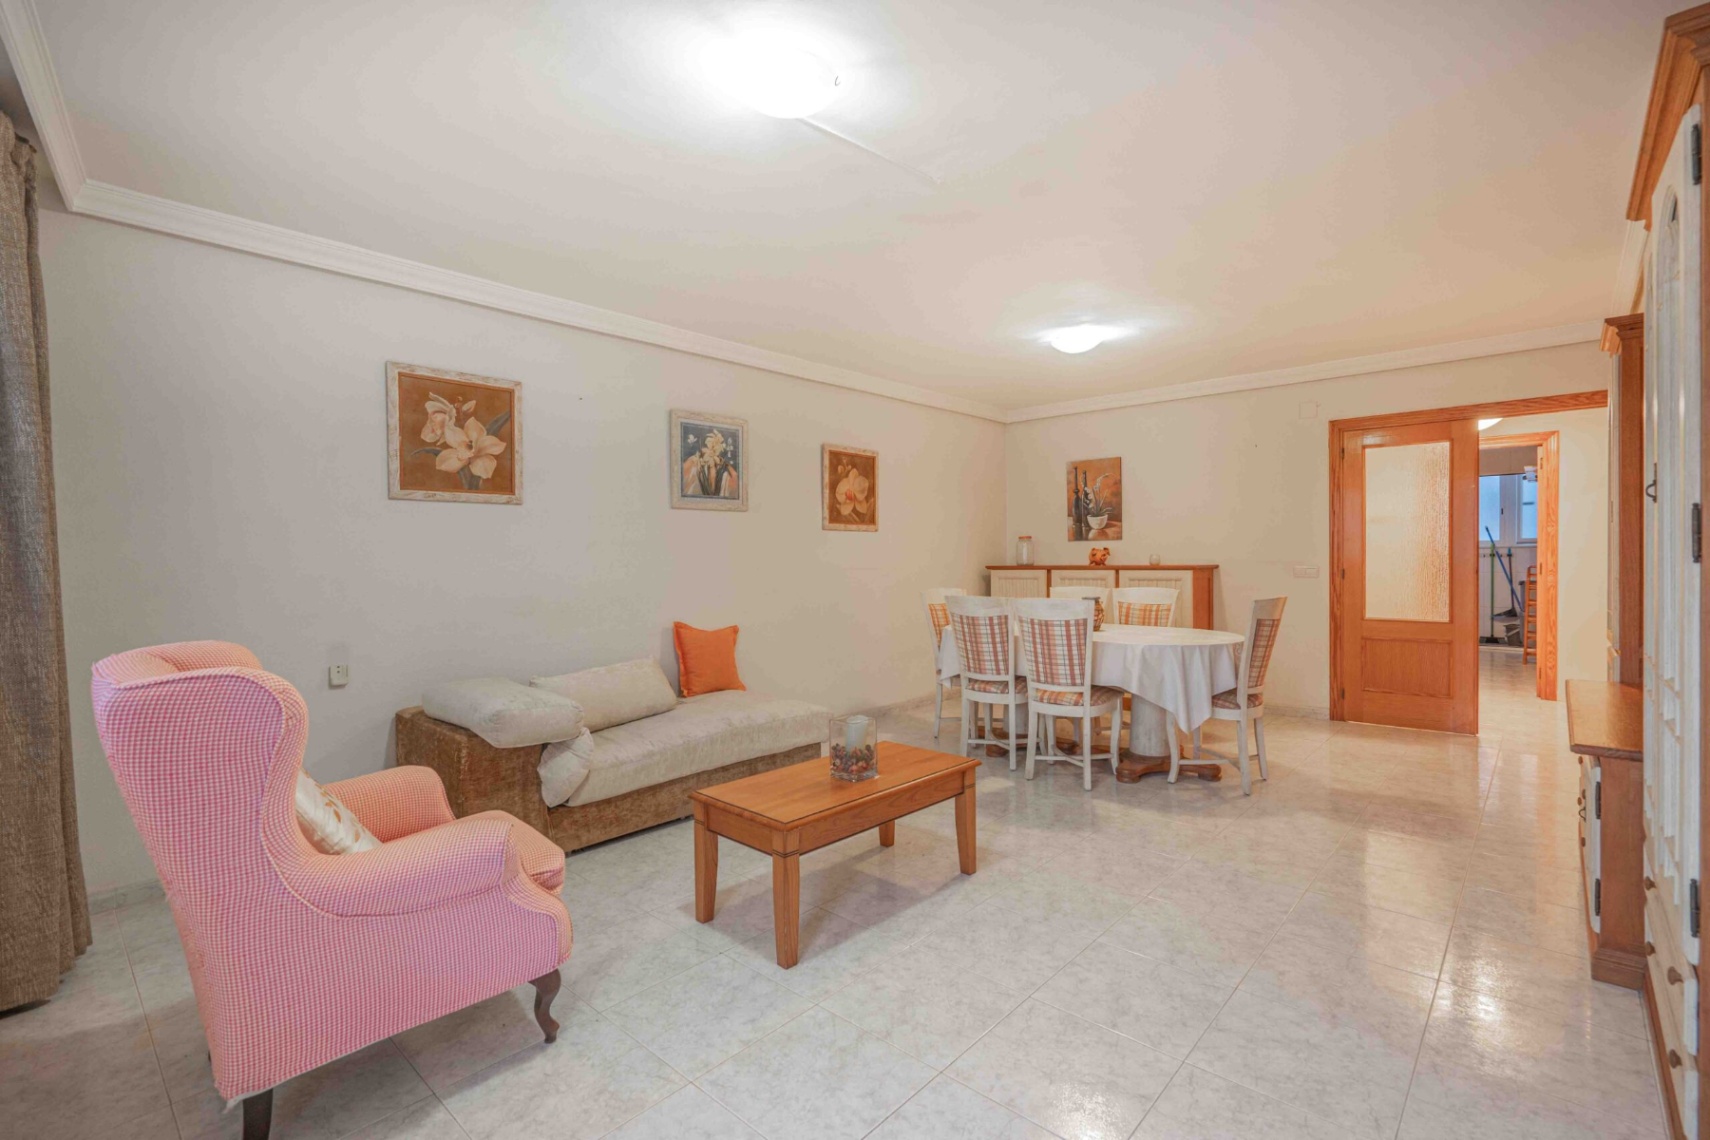 3-bedroom apartment for sale in Javea close to the port and city centre